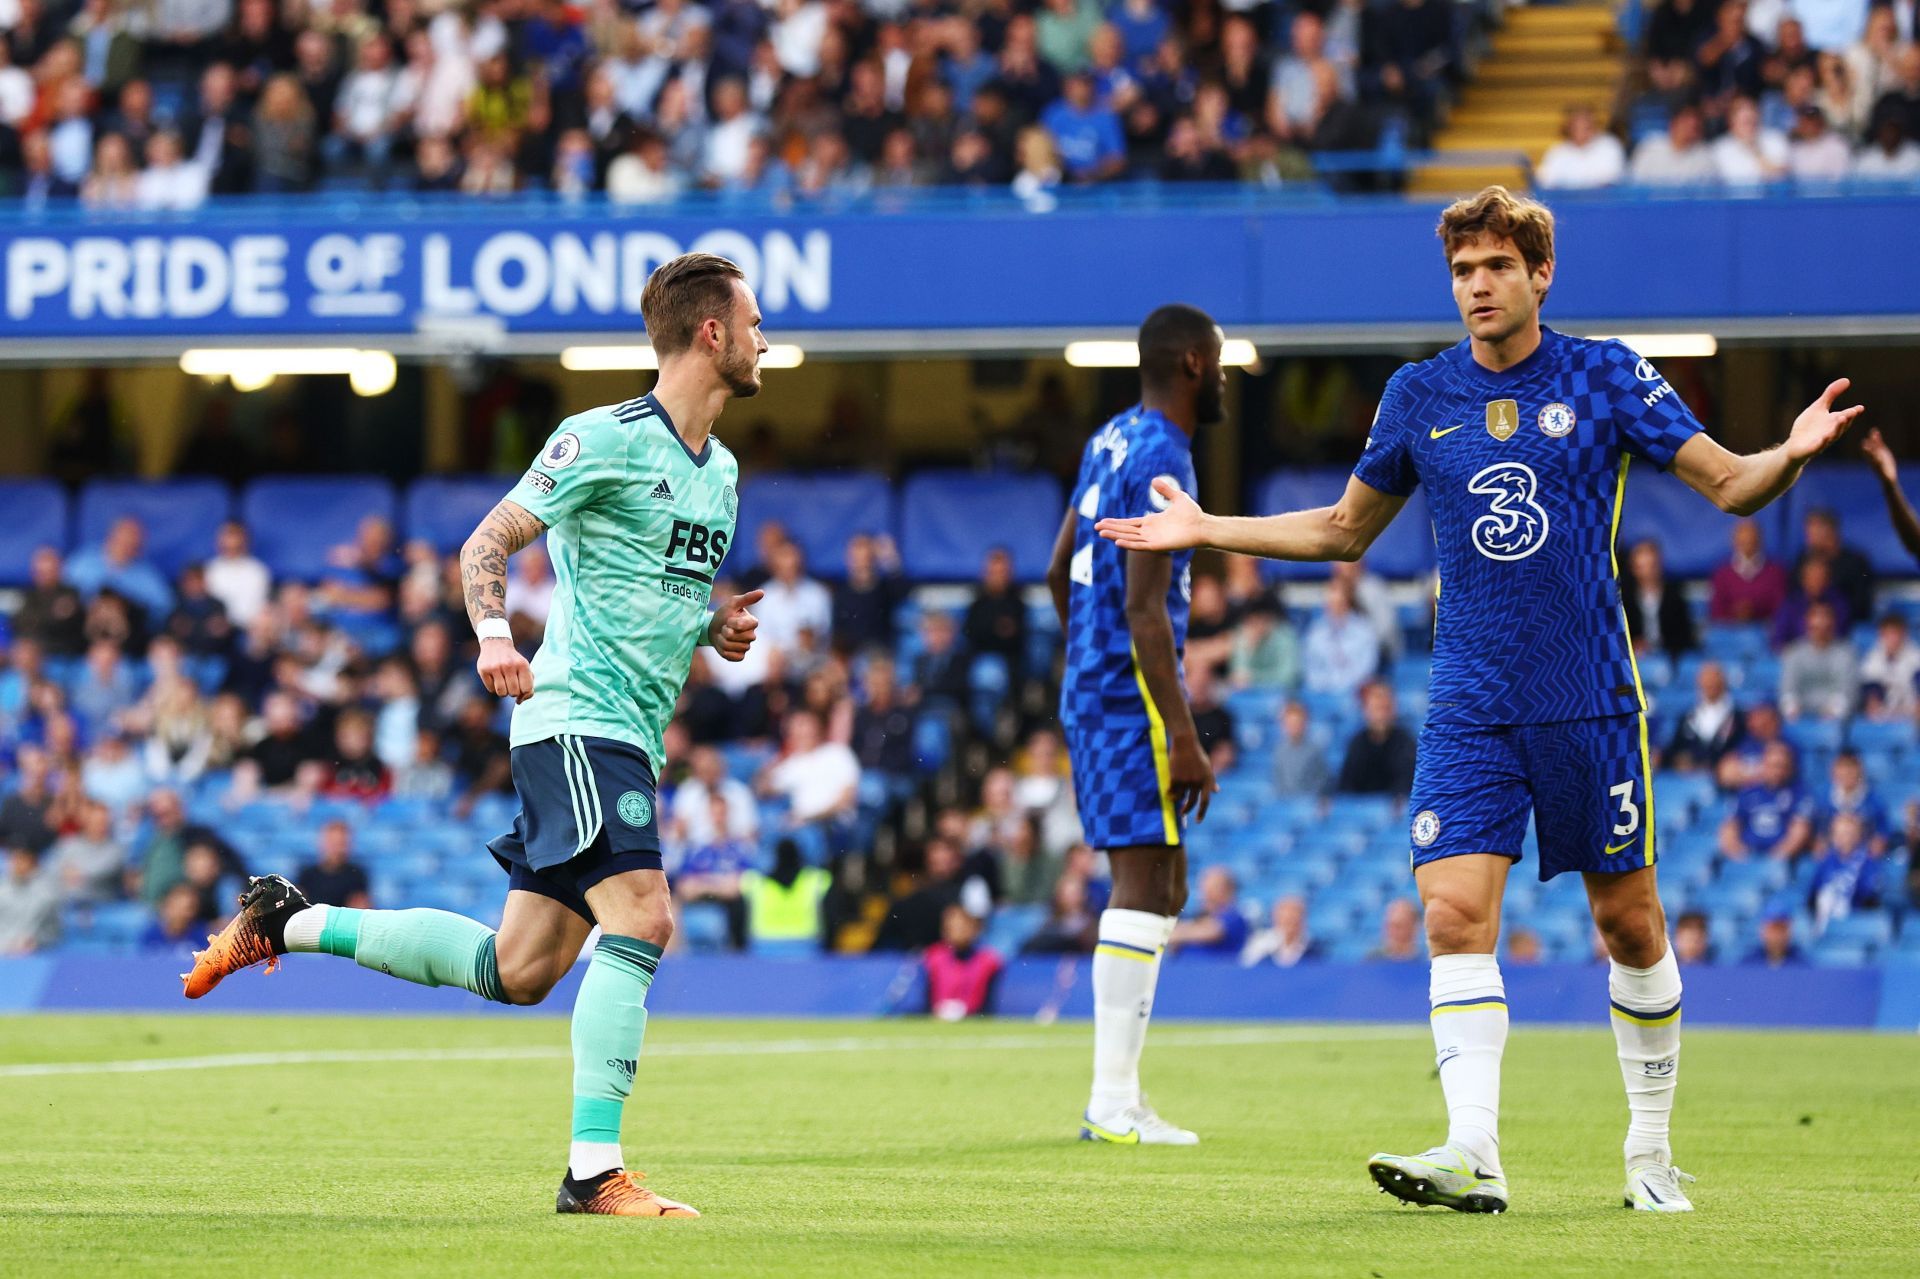 Chelsea and Leicester City shared points at Stamford Bridge